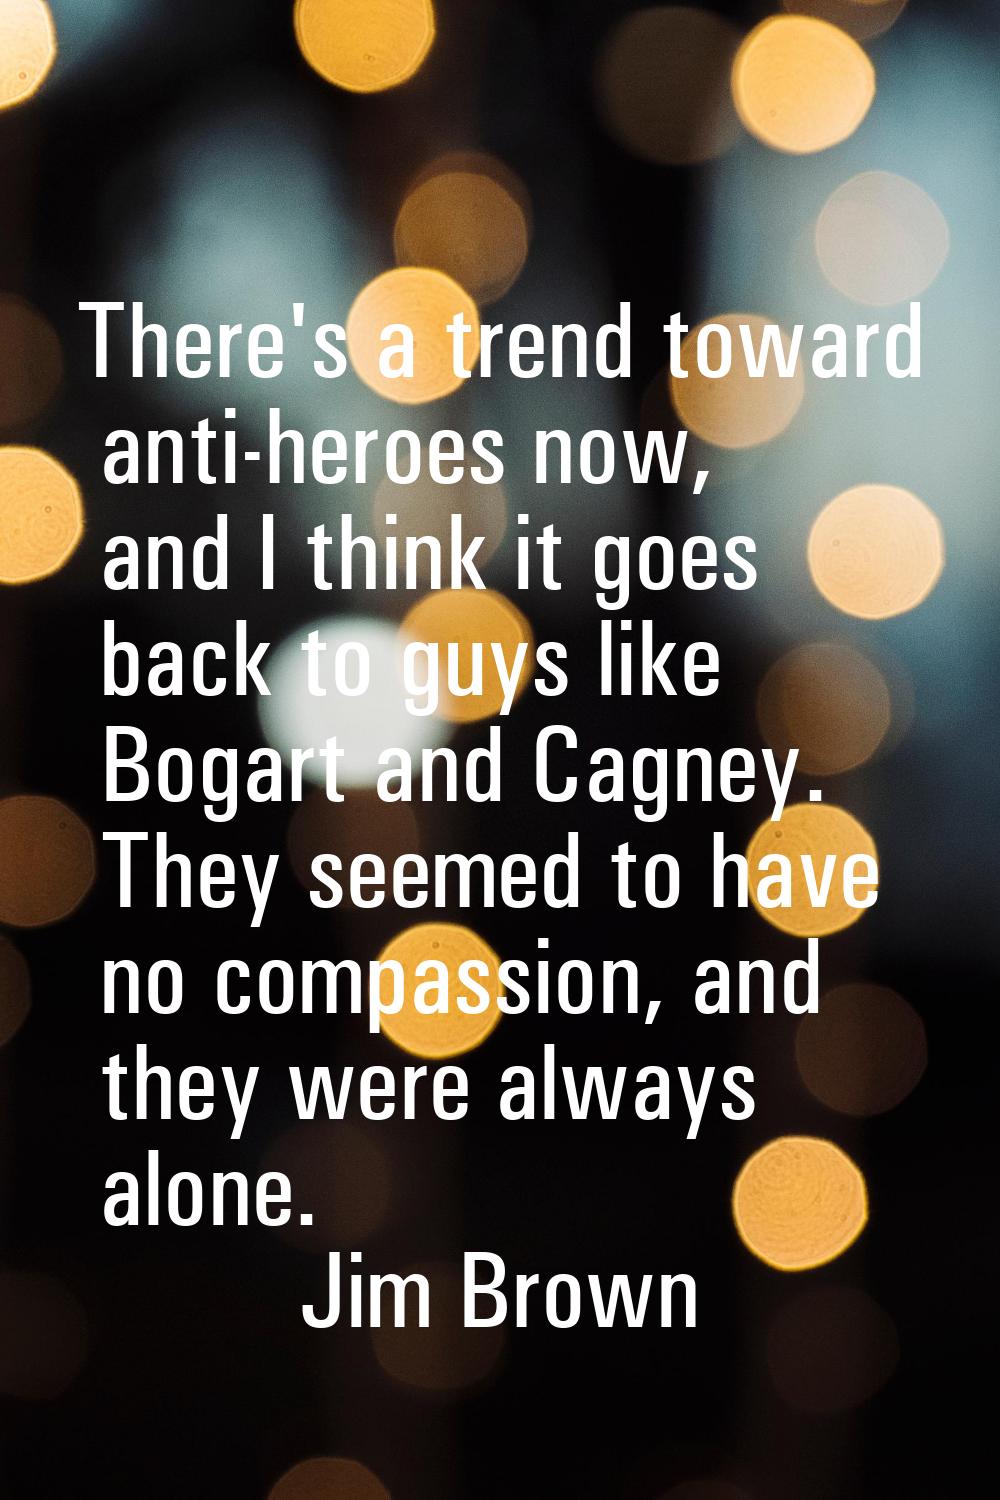 There's a trend toward anti-heroes now, and I think it goes back to guys like Bogart and Cagney. Th